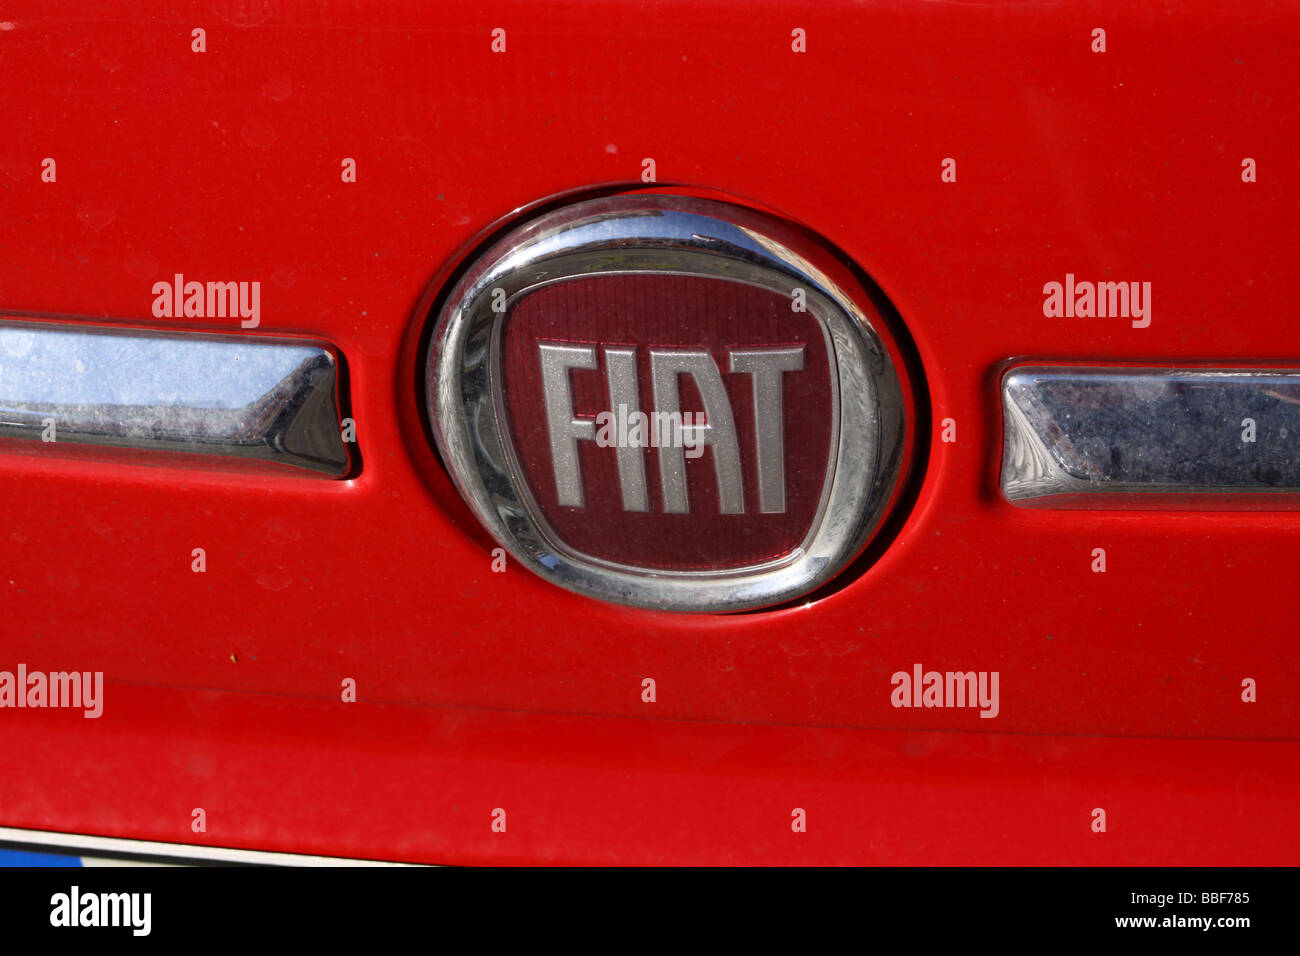 Fiat logo on a red Fiat 500 Stock Photo